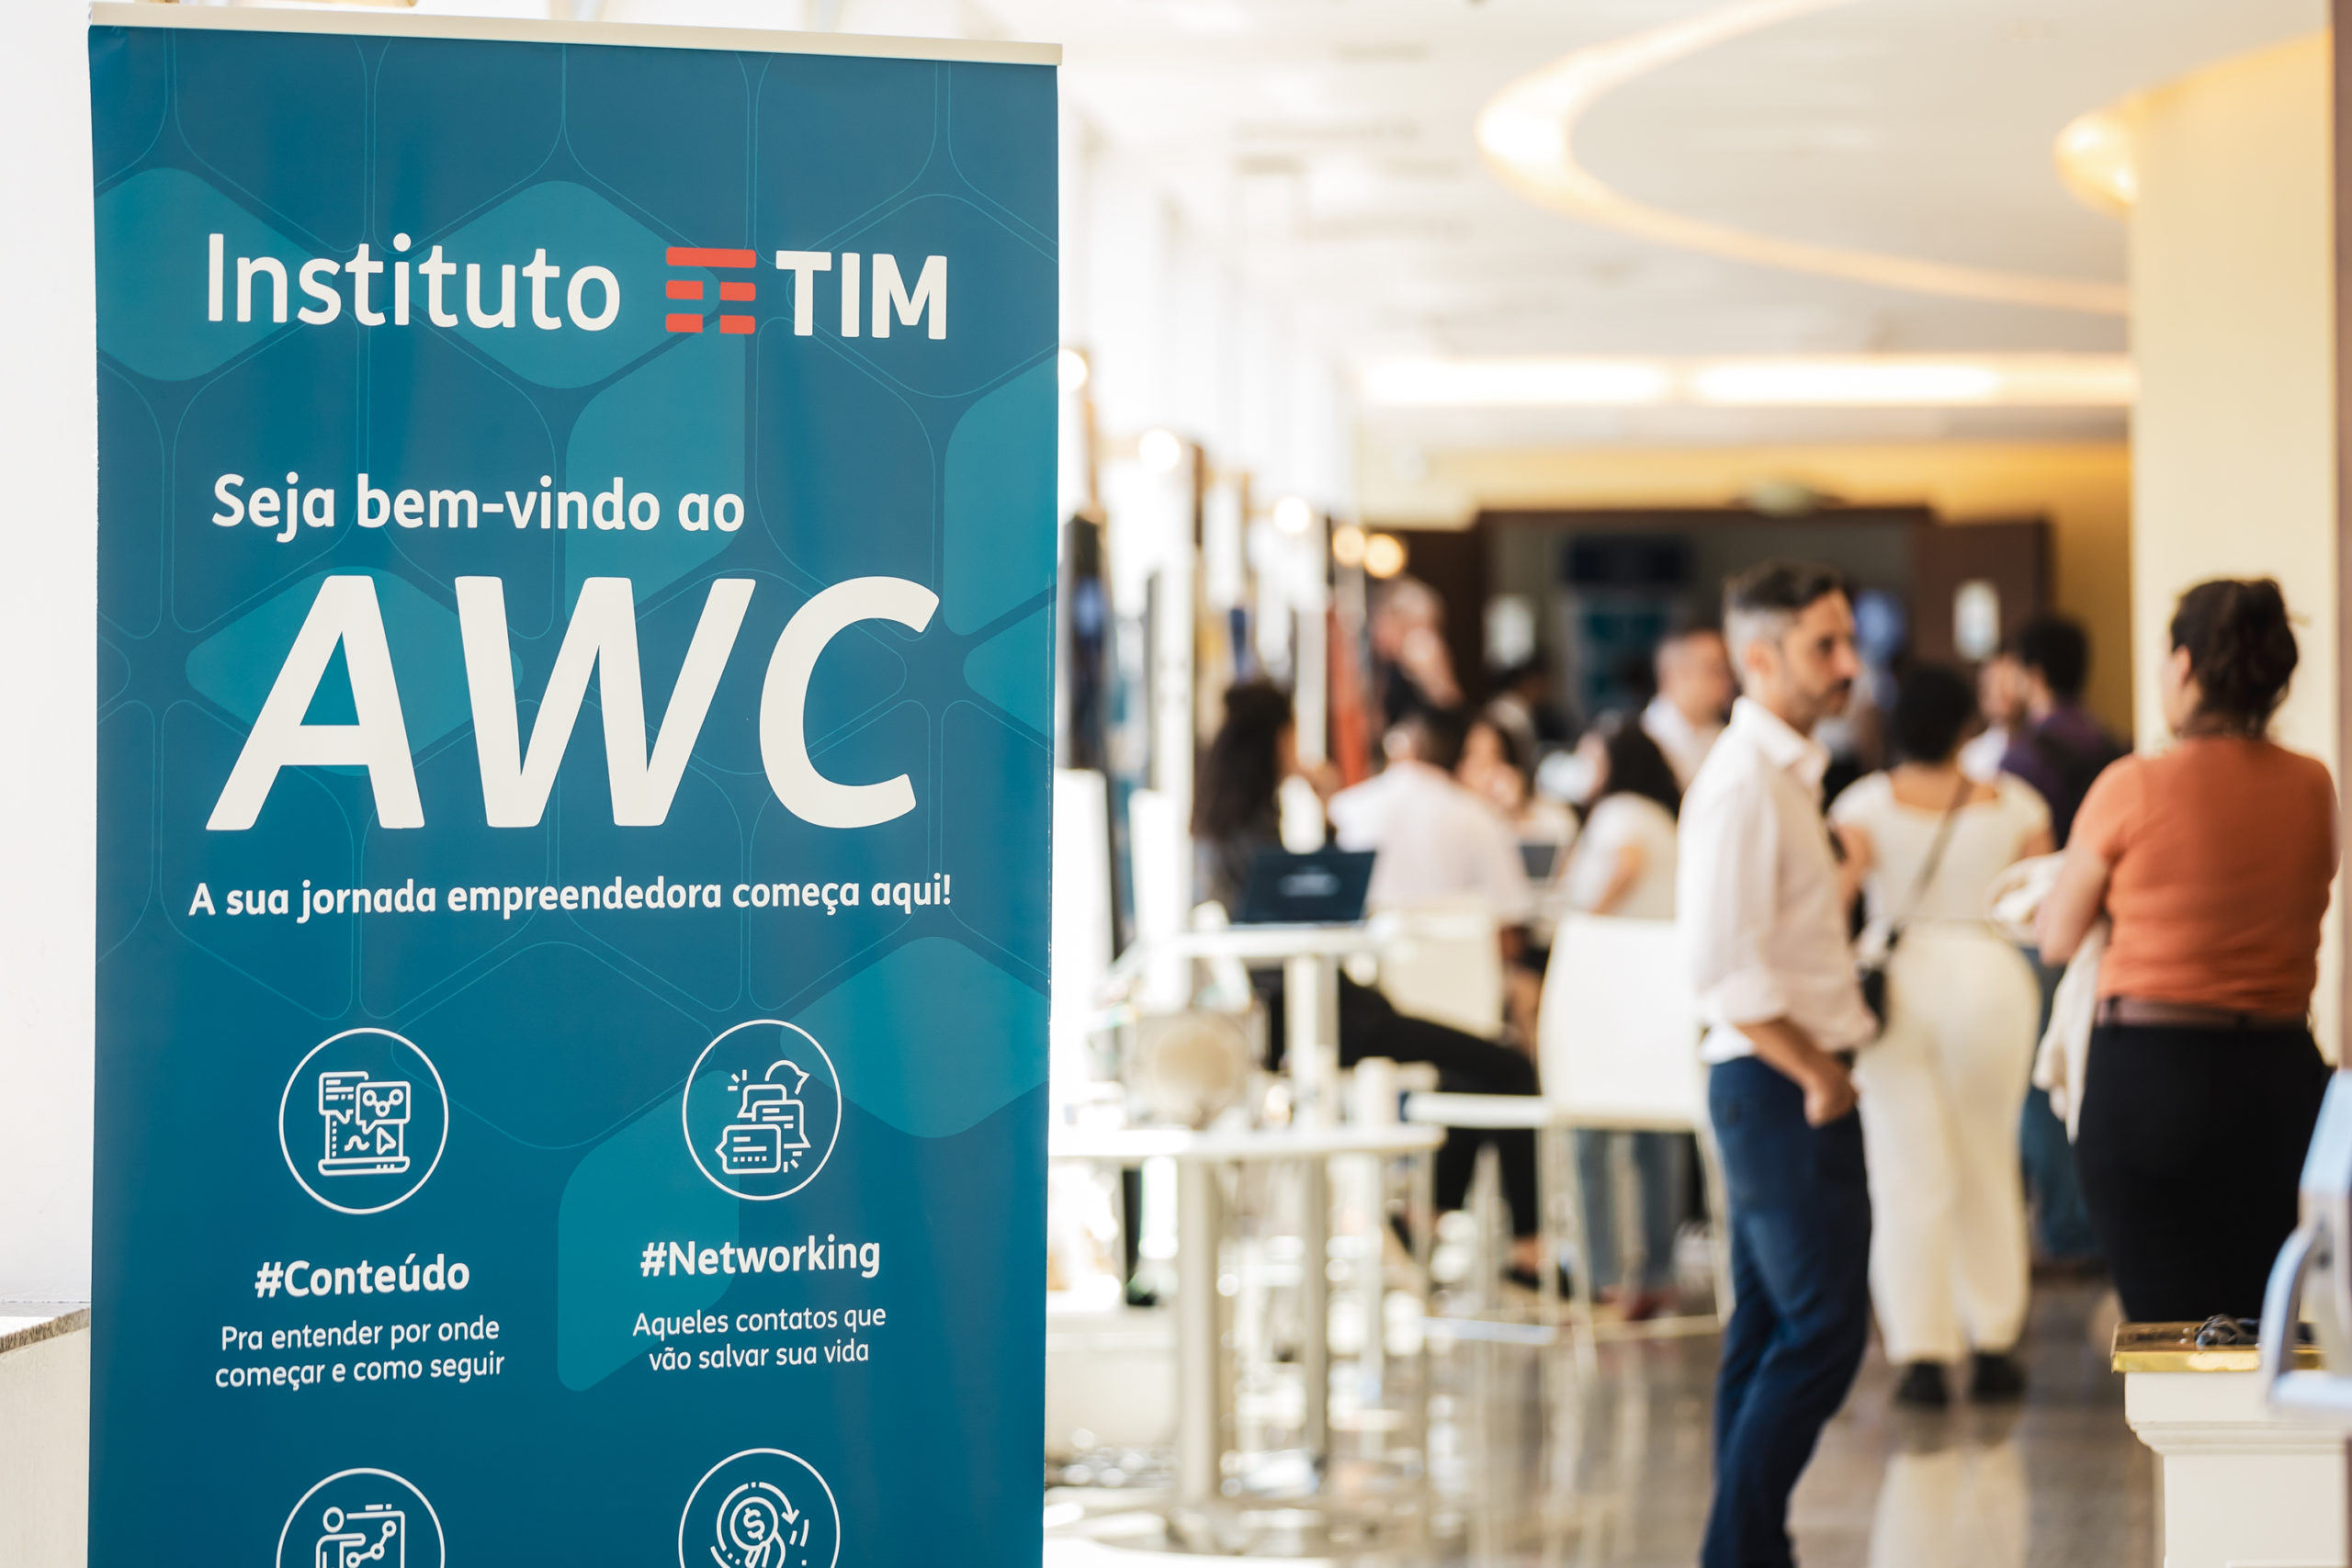 AWC investment fair brings opportunities for startups